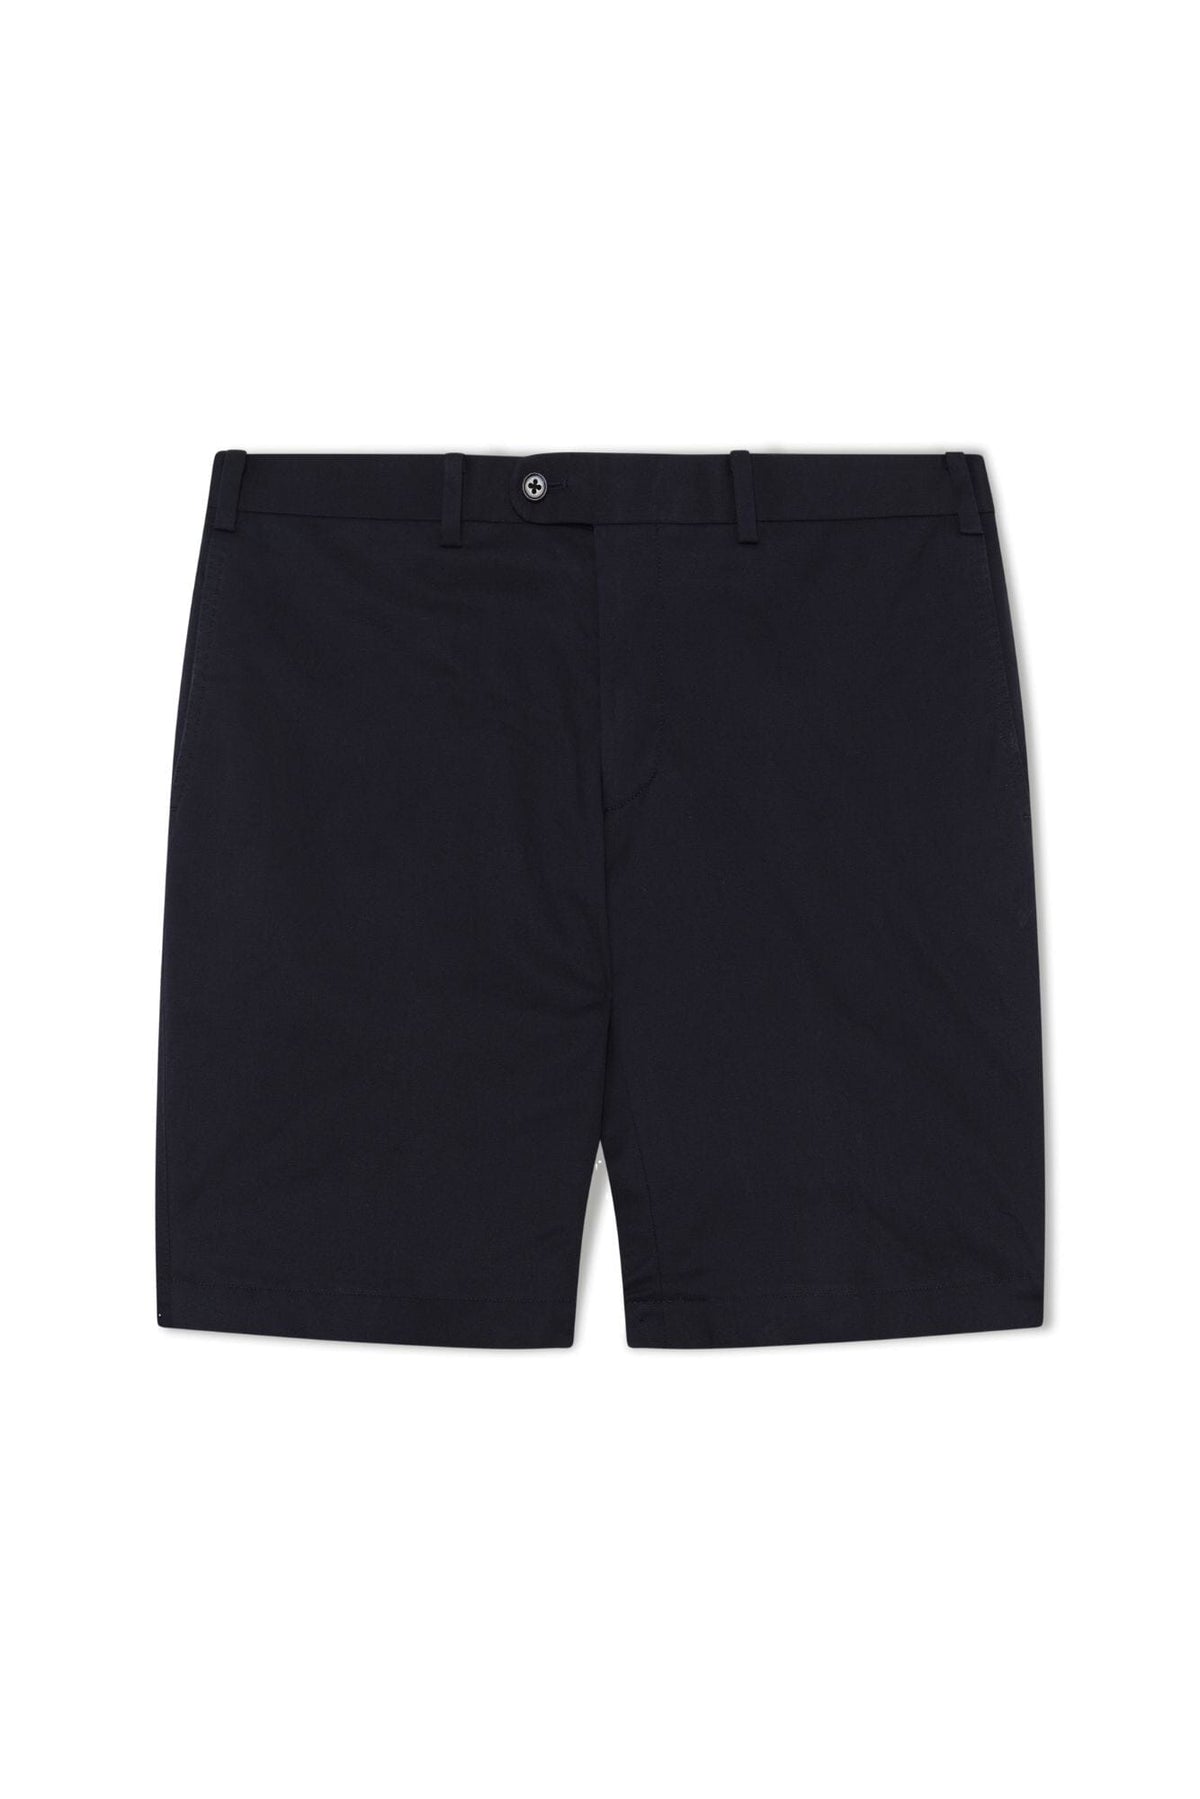 CGC Tailored Shorts - Navy Stretch Cotton